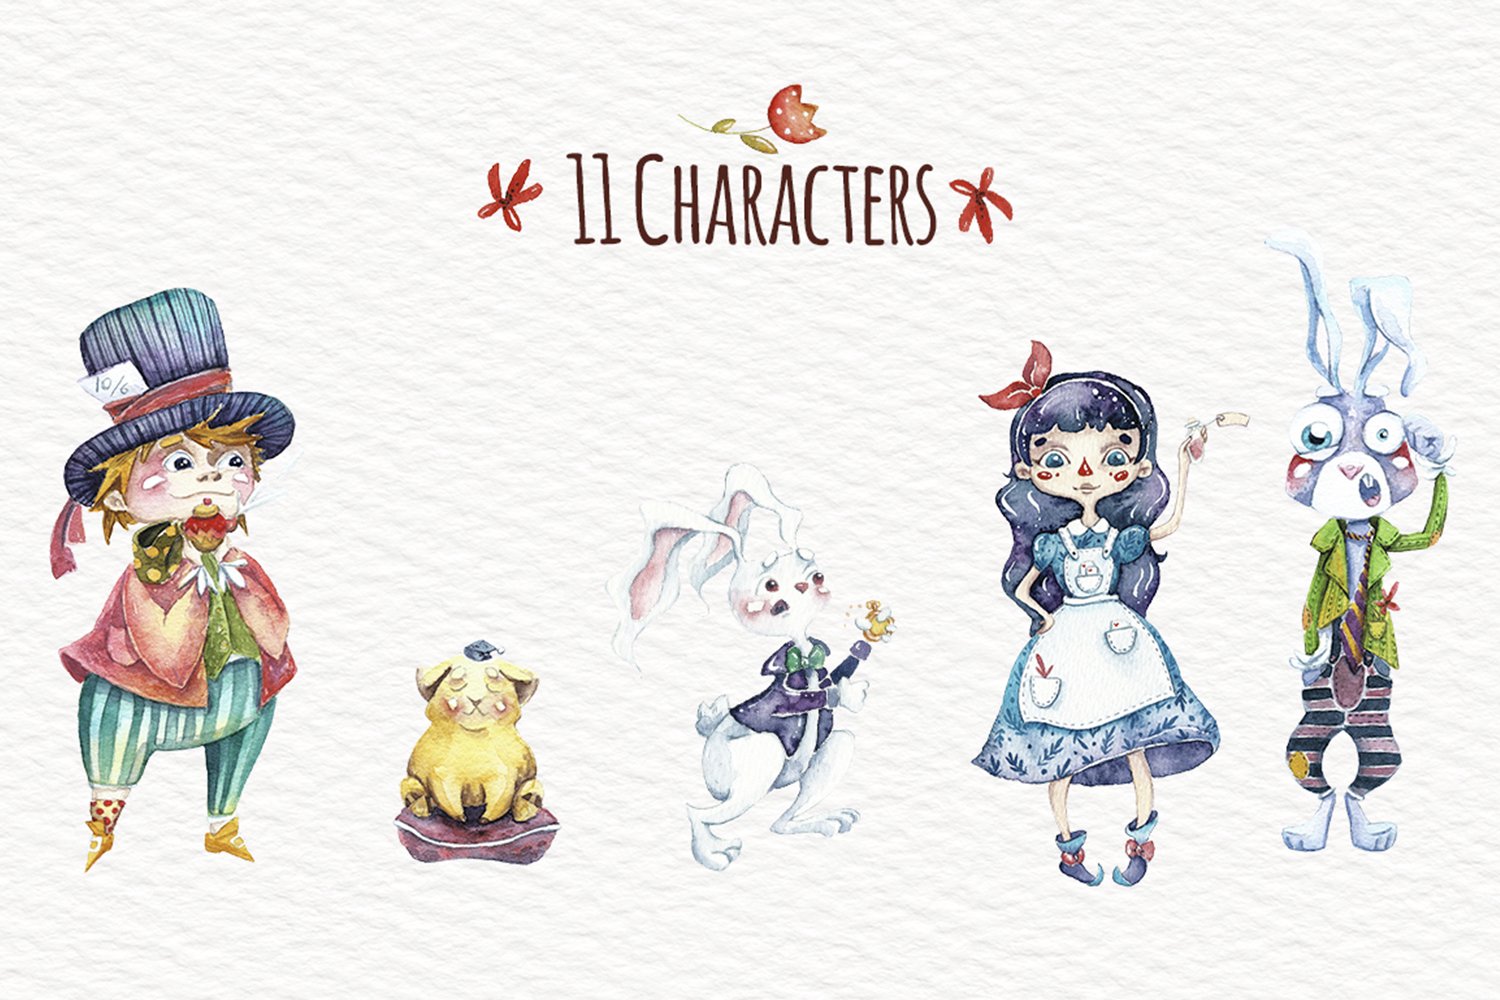 Characters from the tale of Alice.